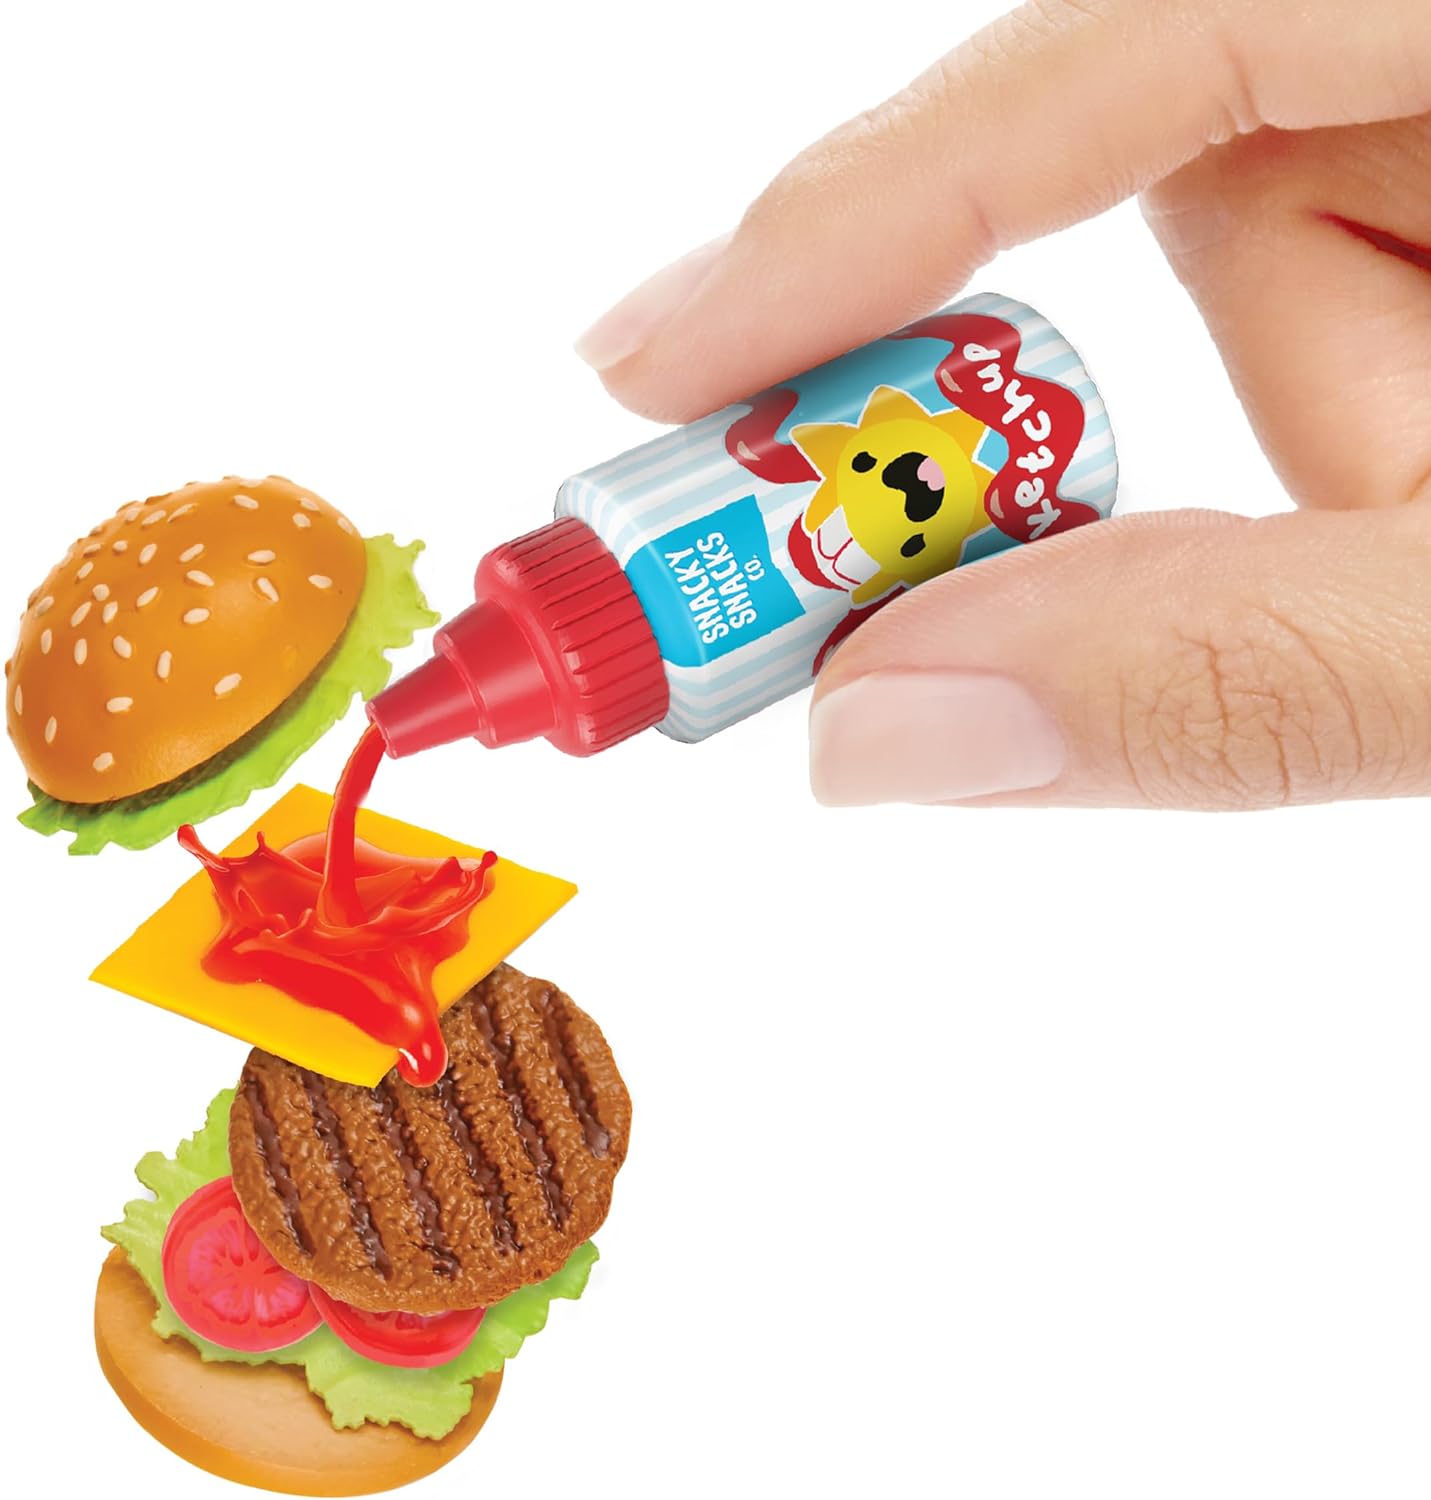 Make It Mini Food Diner Series 3 Mini Collectibles - MGA's Miniverse, Blind Packaging, DIY, Resin Play, Replica Food, NOT Edible, Collectors, 8+(Multi Color)